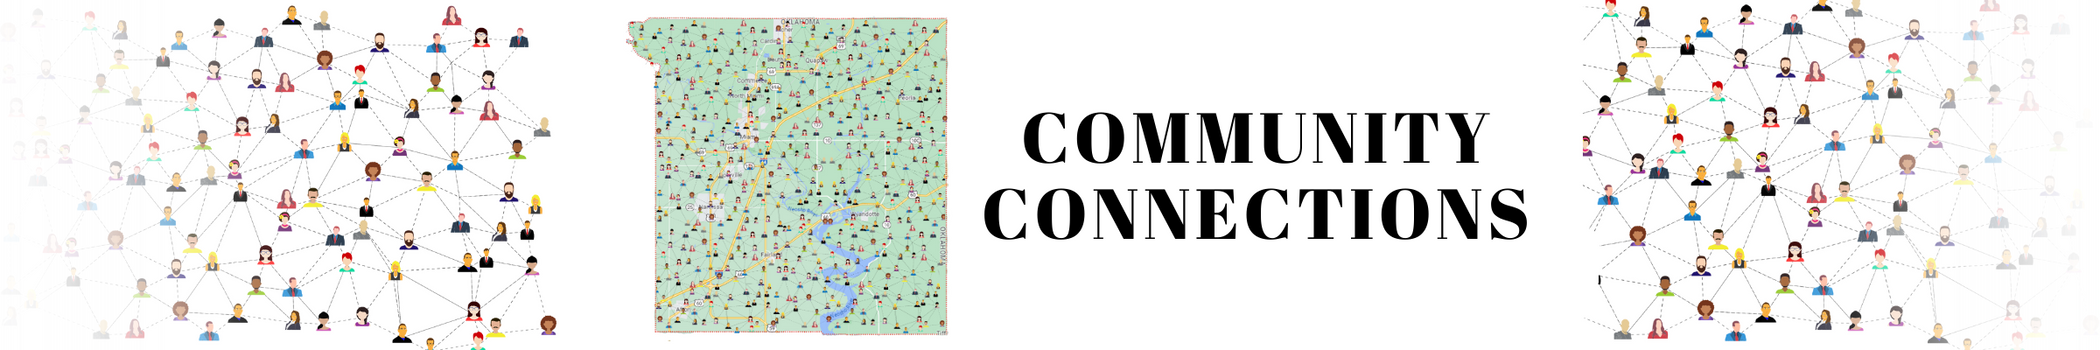 Community Connections - click to redirect to the Community Connections Page of the Miami Public Library website